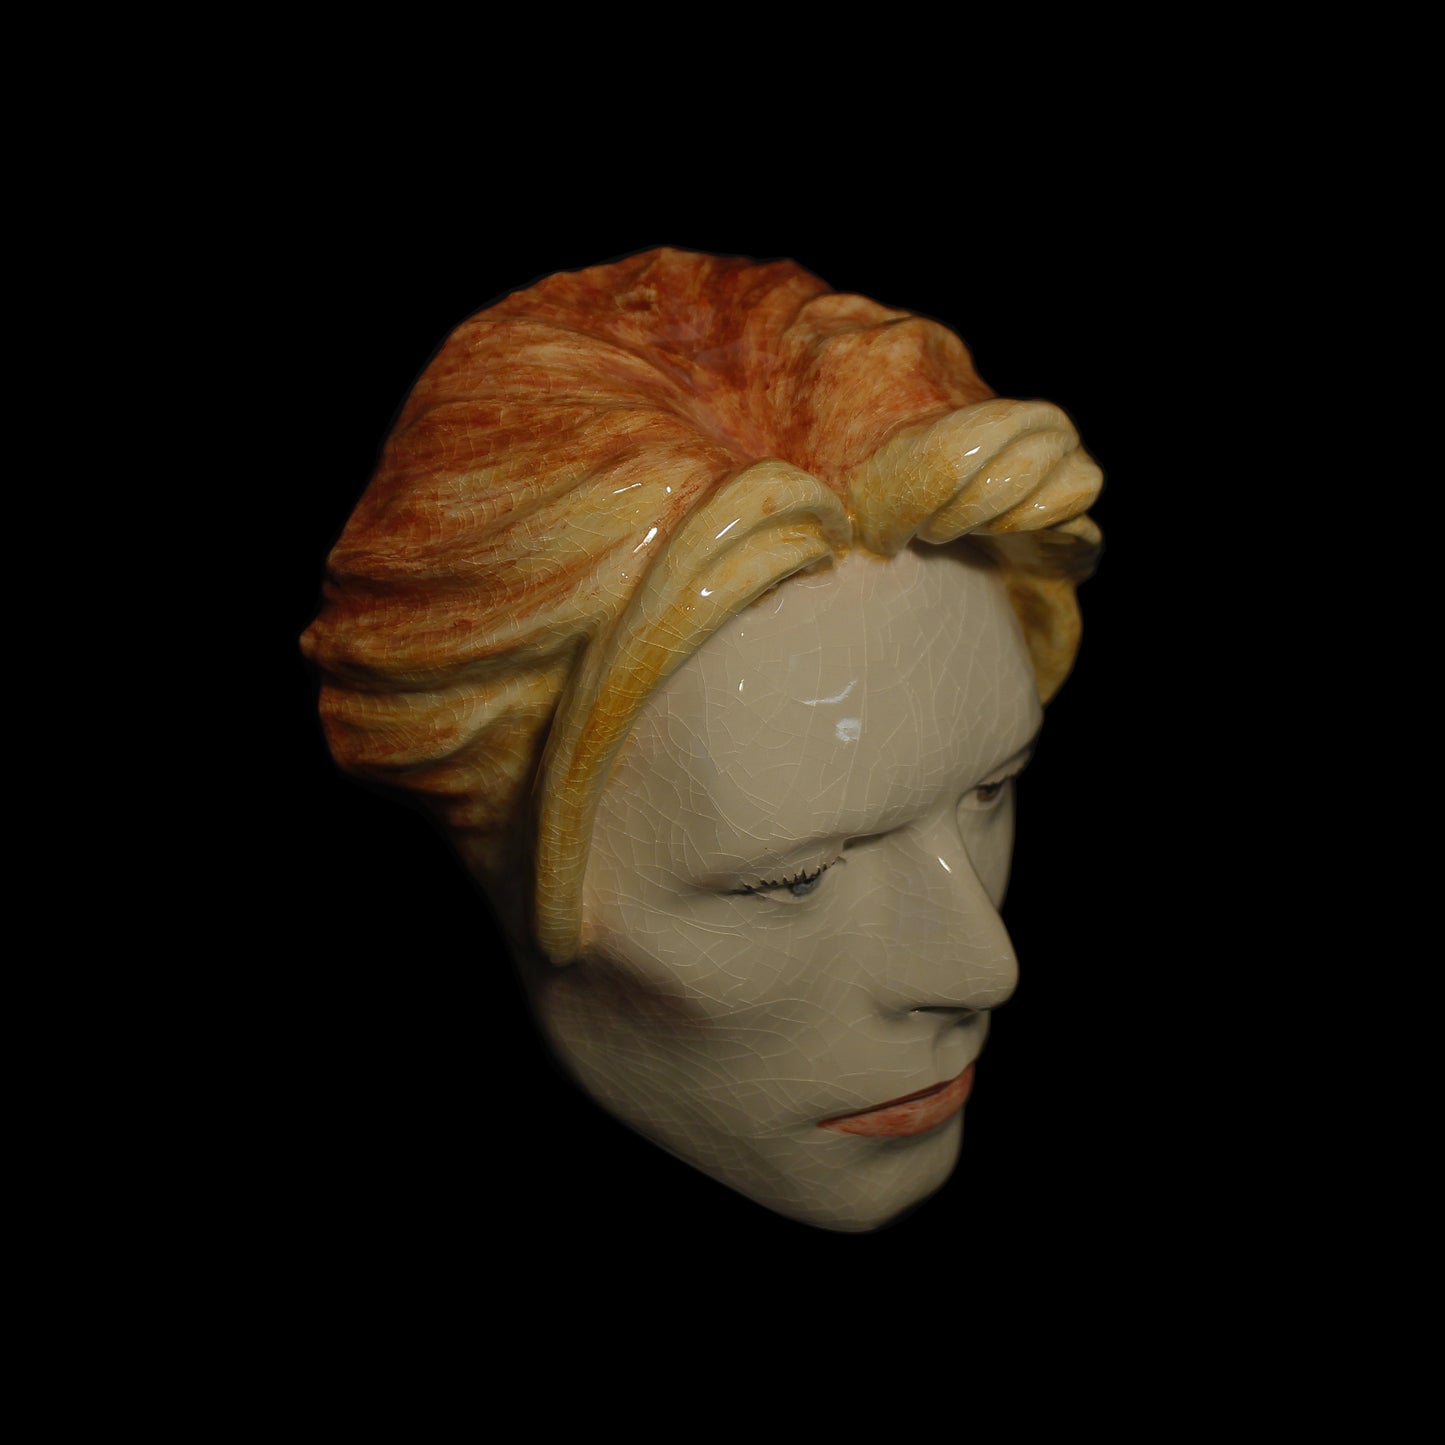 David Bowie - The Man Who Fell To Earth Mask